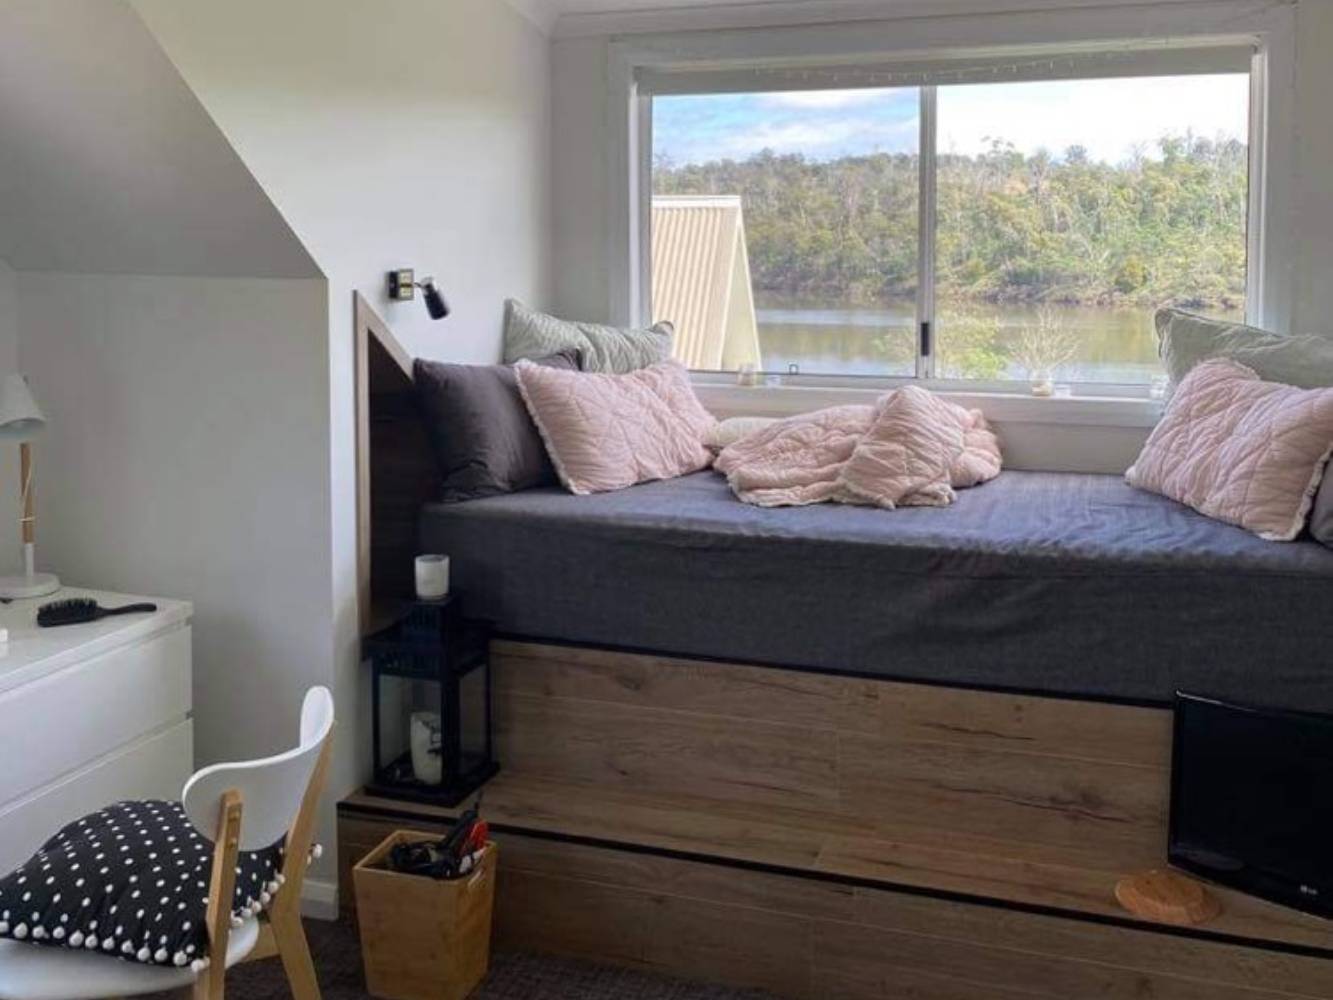 2nd bedroom with comfy window seat perfect for taking in our river views or reading a book.